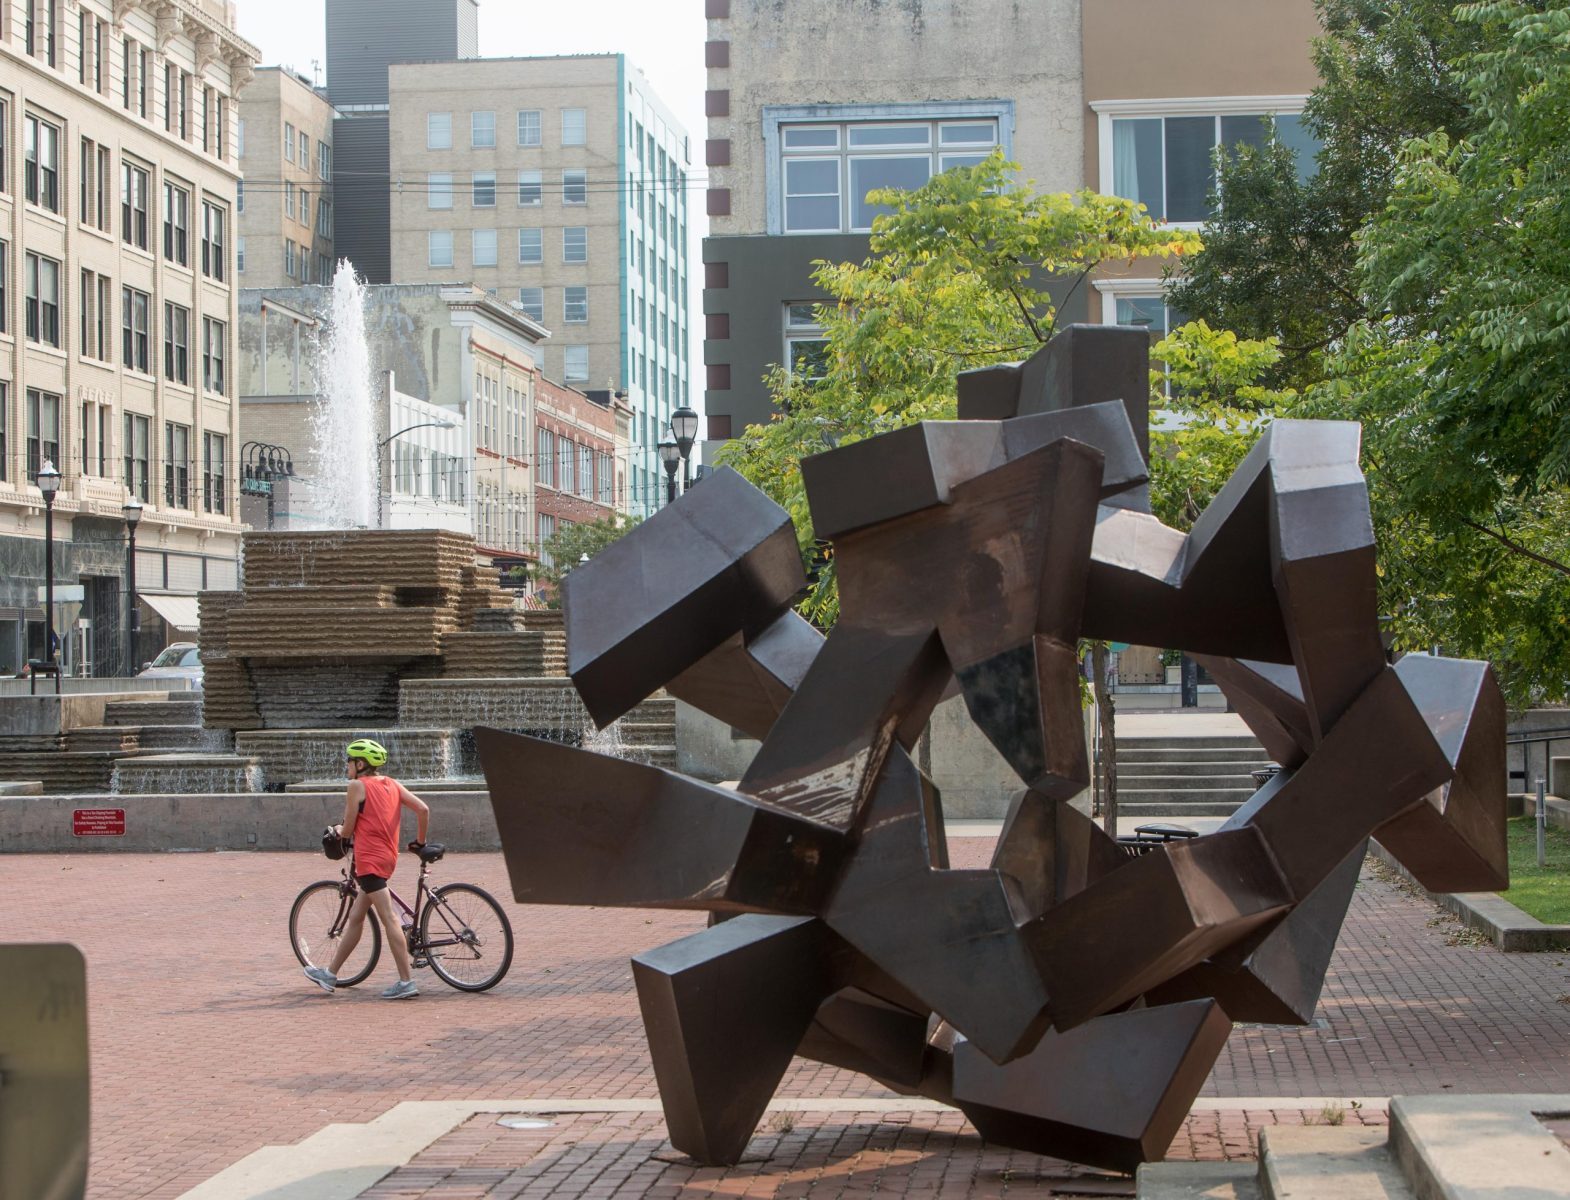 A big steel sculpture in downtown Springfield's Park Central Square called "The Tumbler"